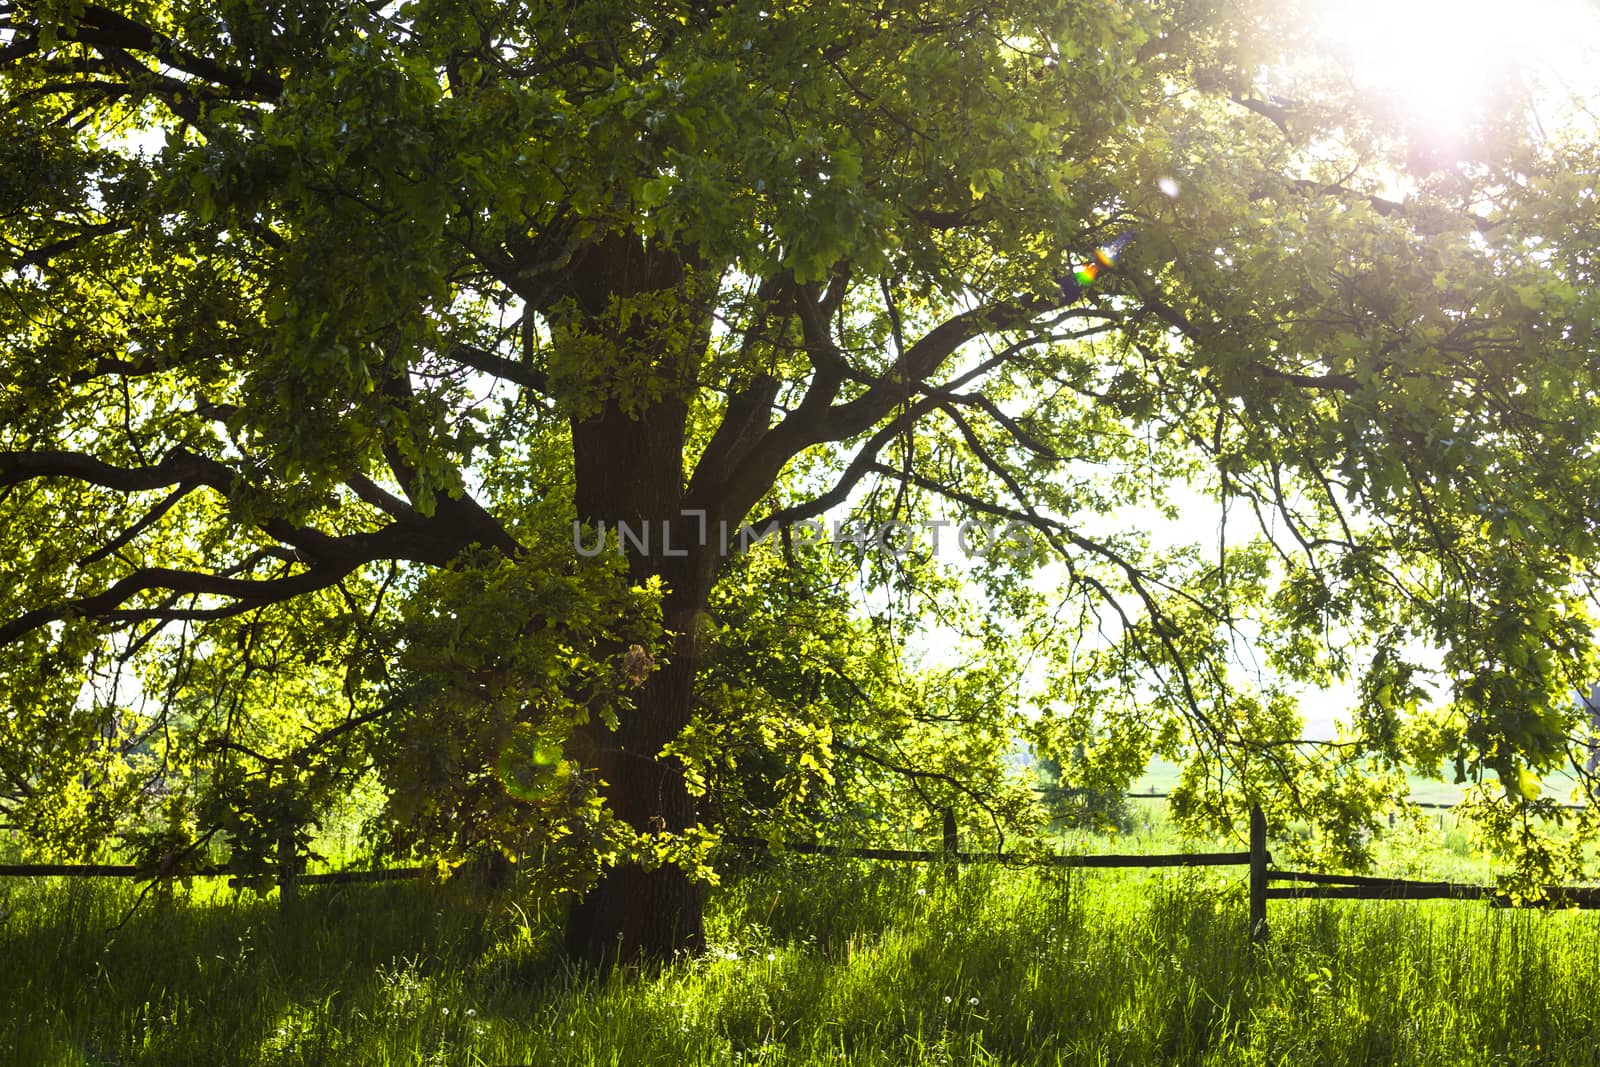 The old oak tree in bright summer day.